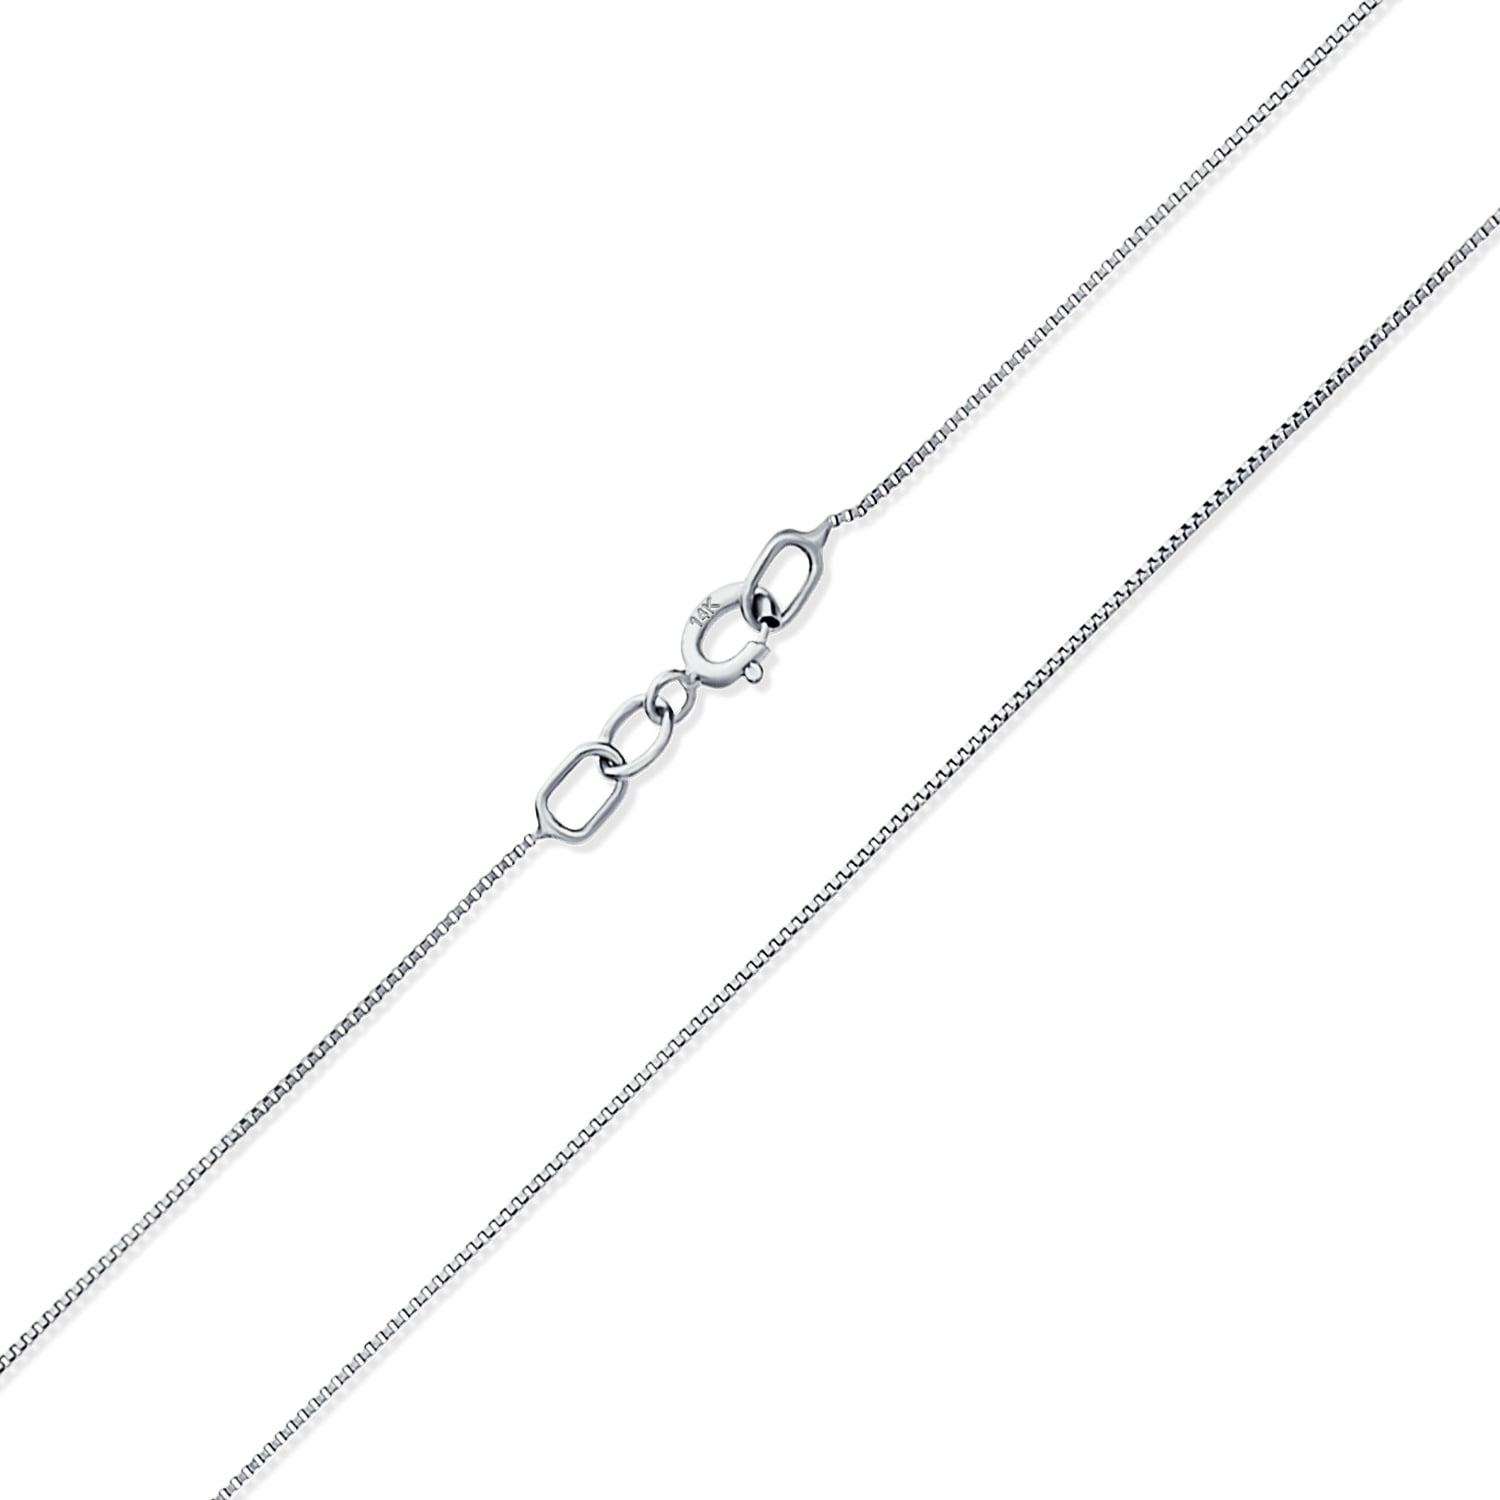 SOLID 14K WHITE GOLD ITALIAN 0.6MM BOX CHAIN NECKLACE 24"